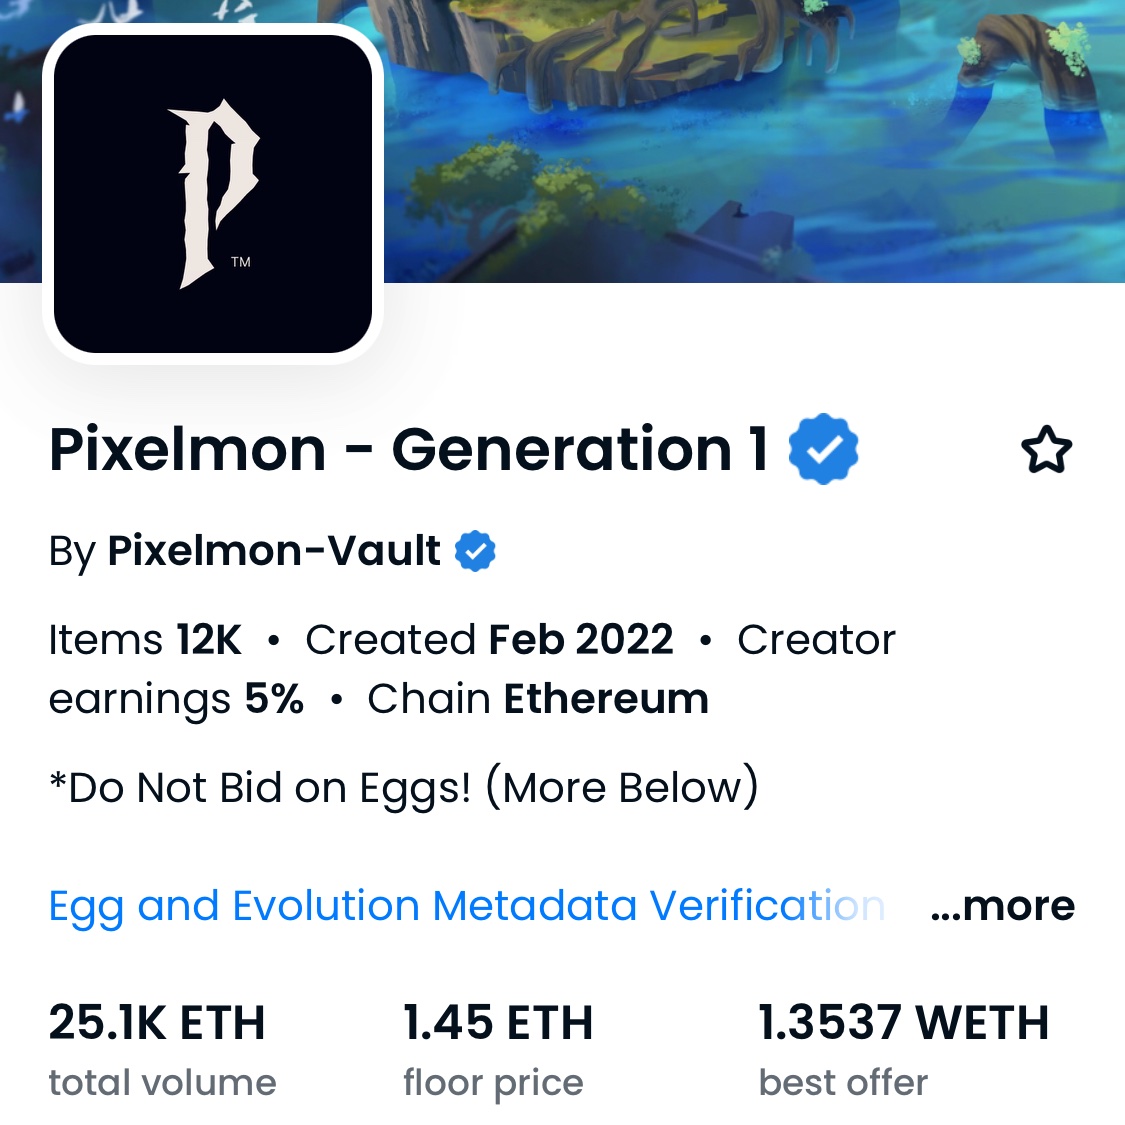 No one deserves this more than the @Pixelmon team. They acquired a dead project and turned it into the next big Web3 gaming company. It’s been an honor to work with them.